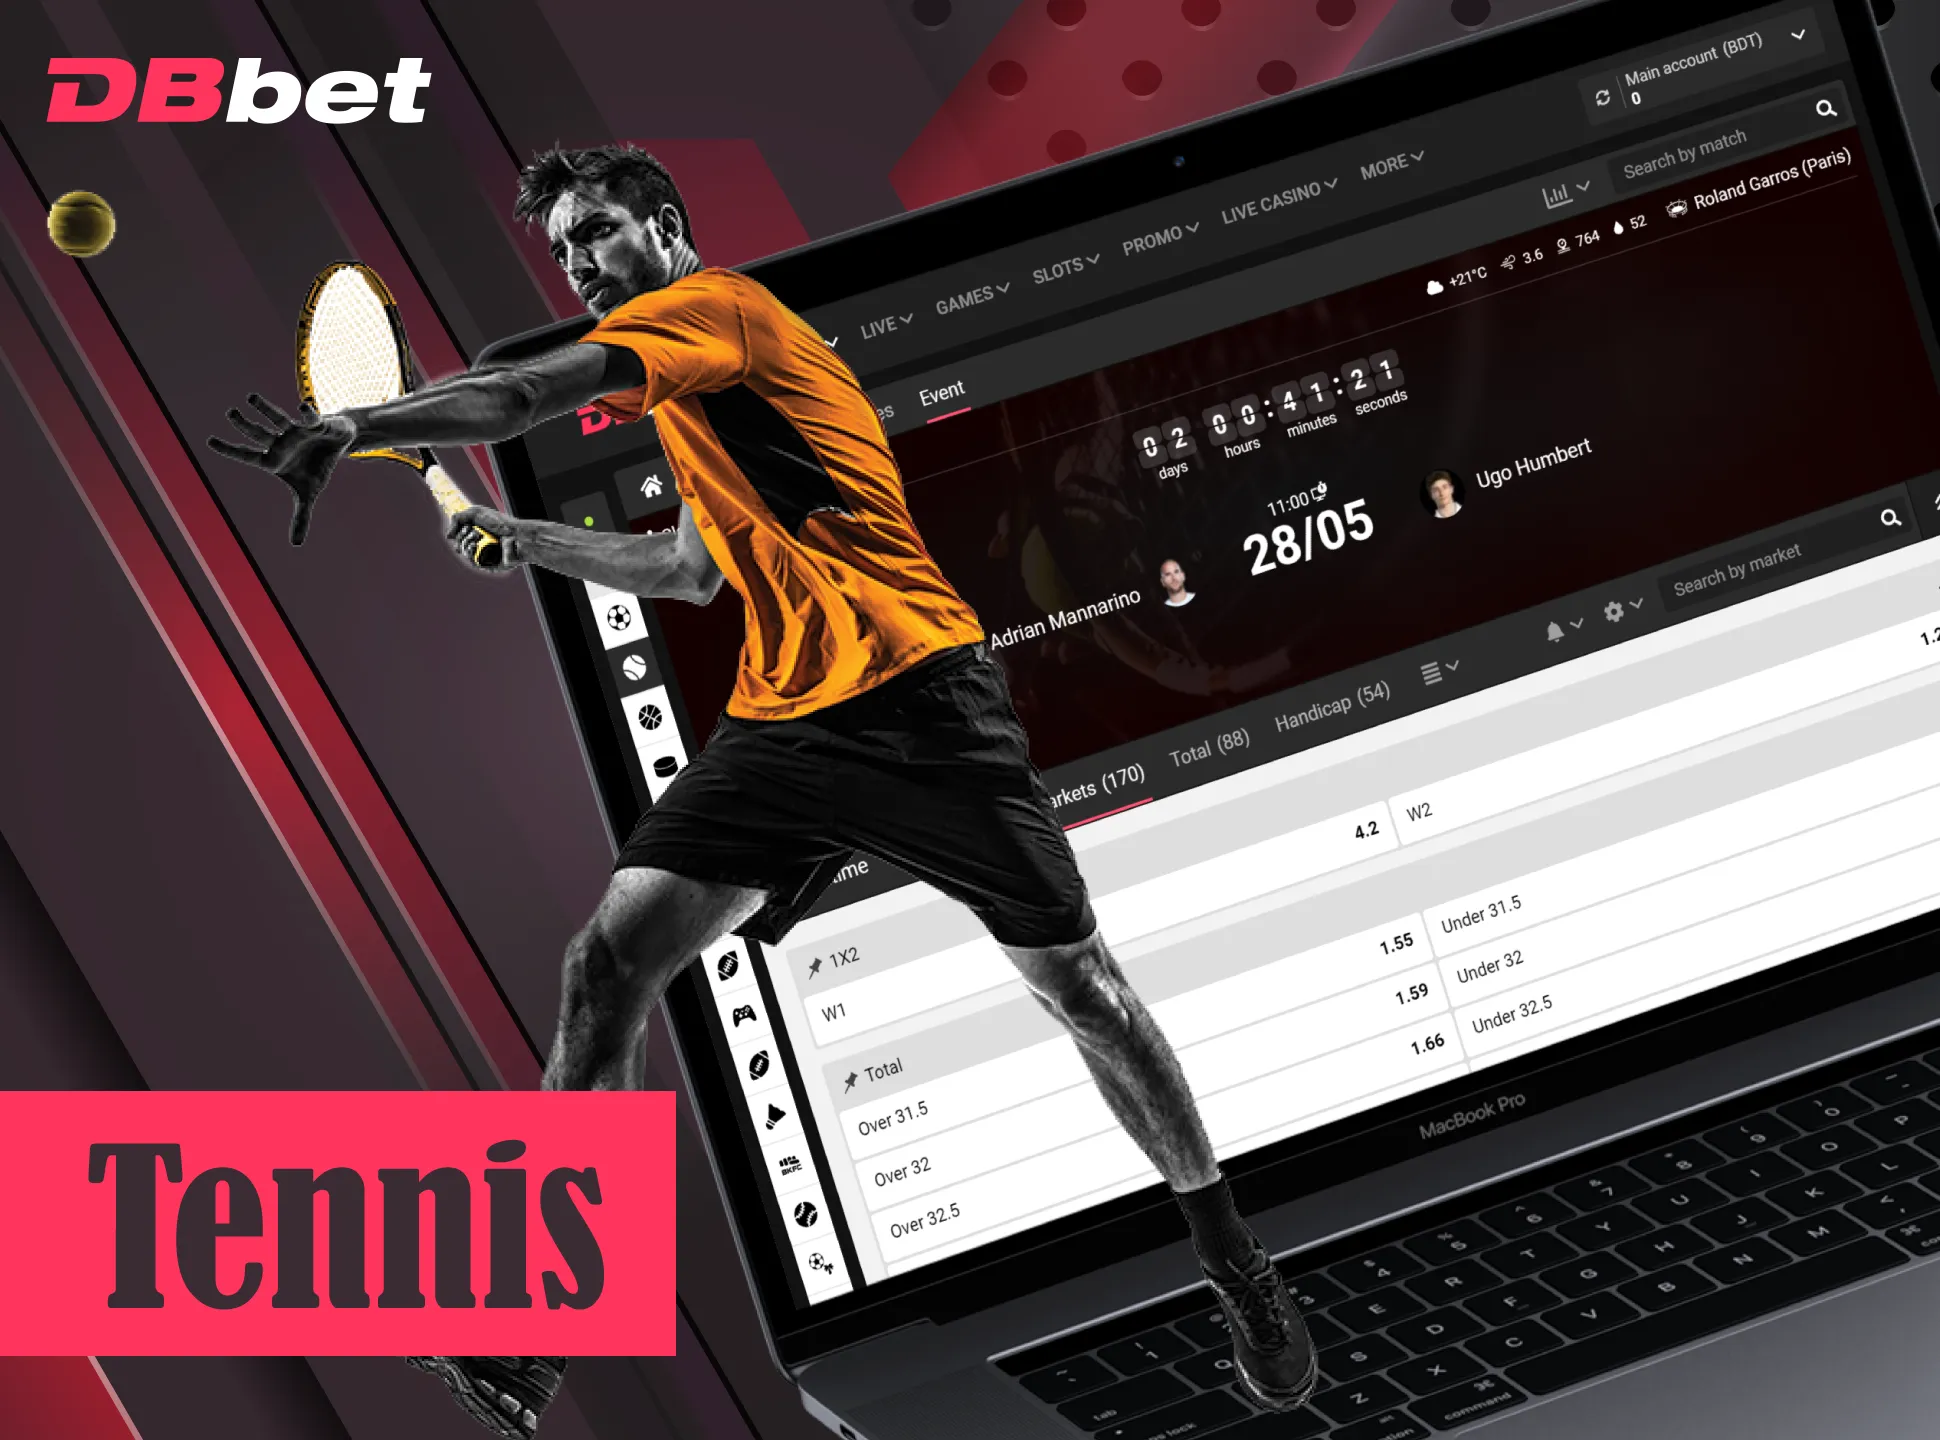 Bet on legendary tennis players at DBbet.